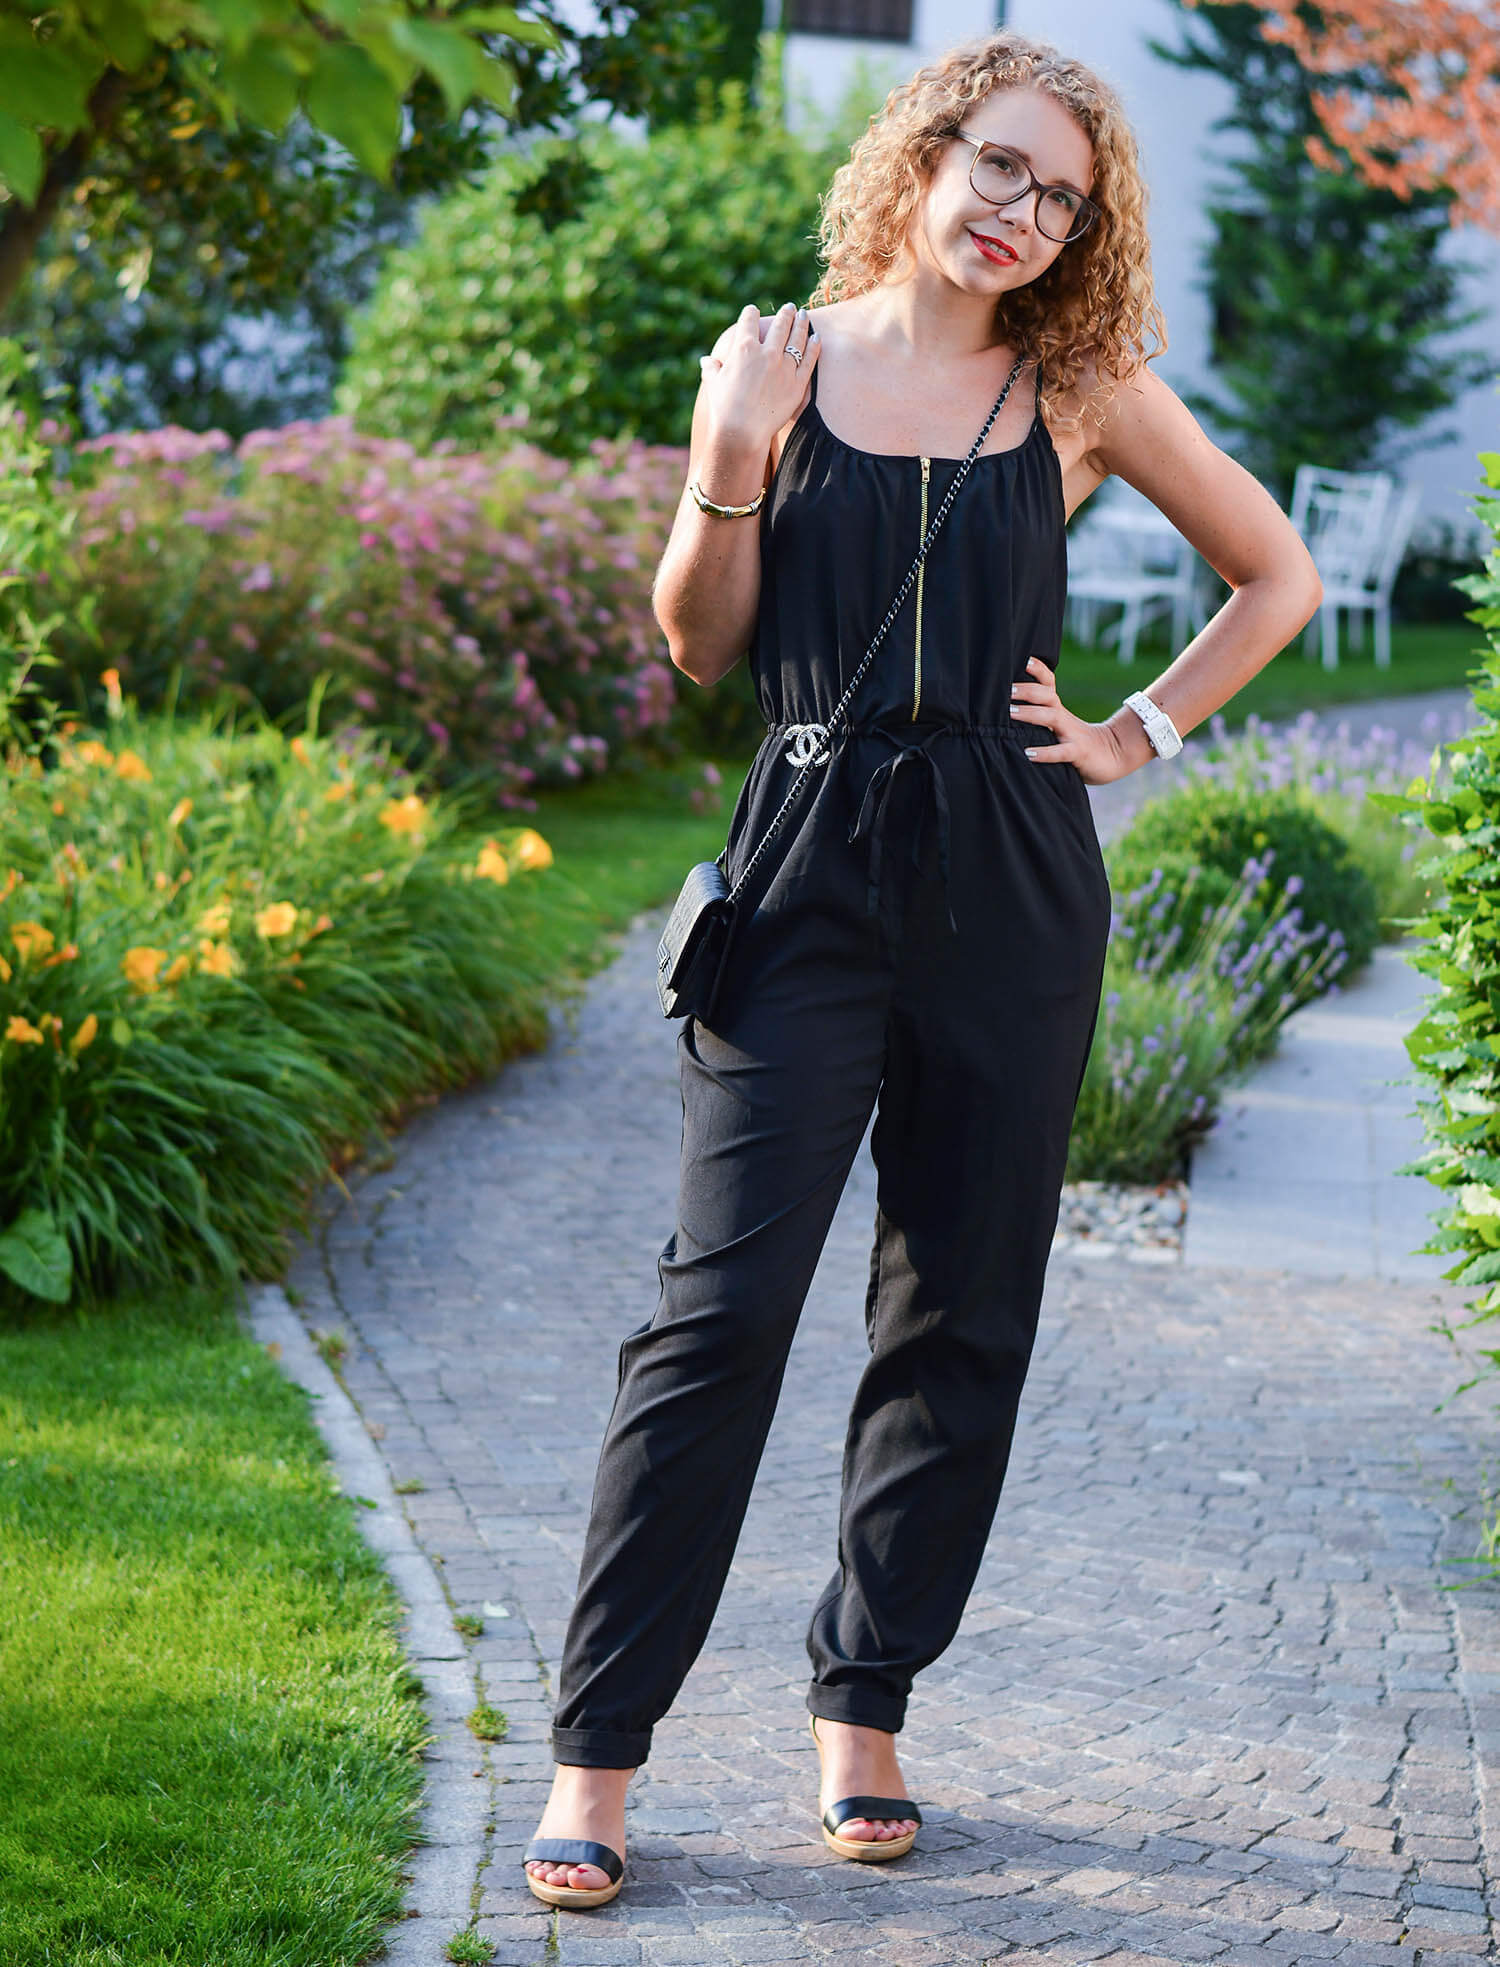 Kationette-fashionblog-nrw-Outfit-Allblack-Jumpsuit-Chanel-South-Tyrol